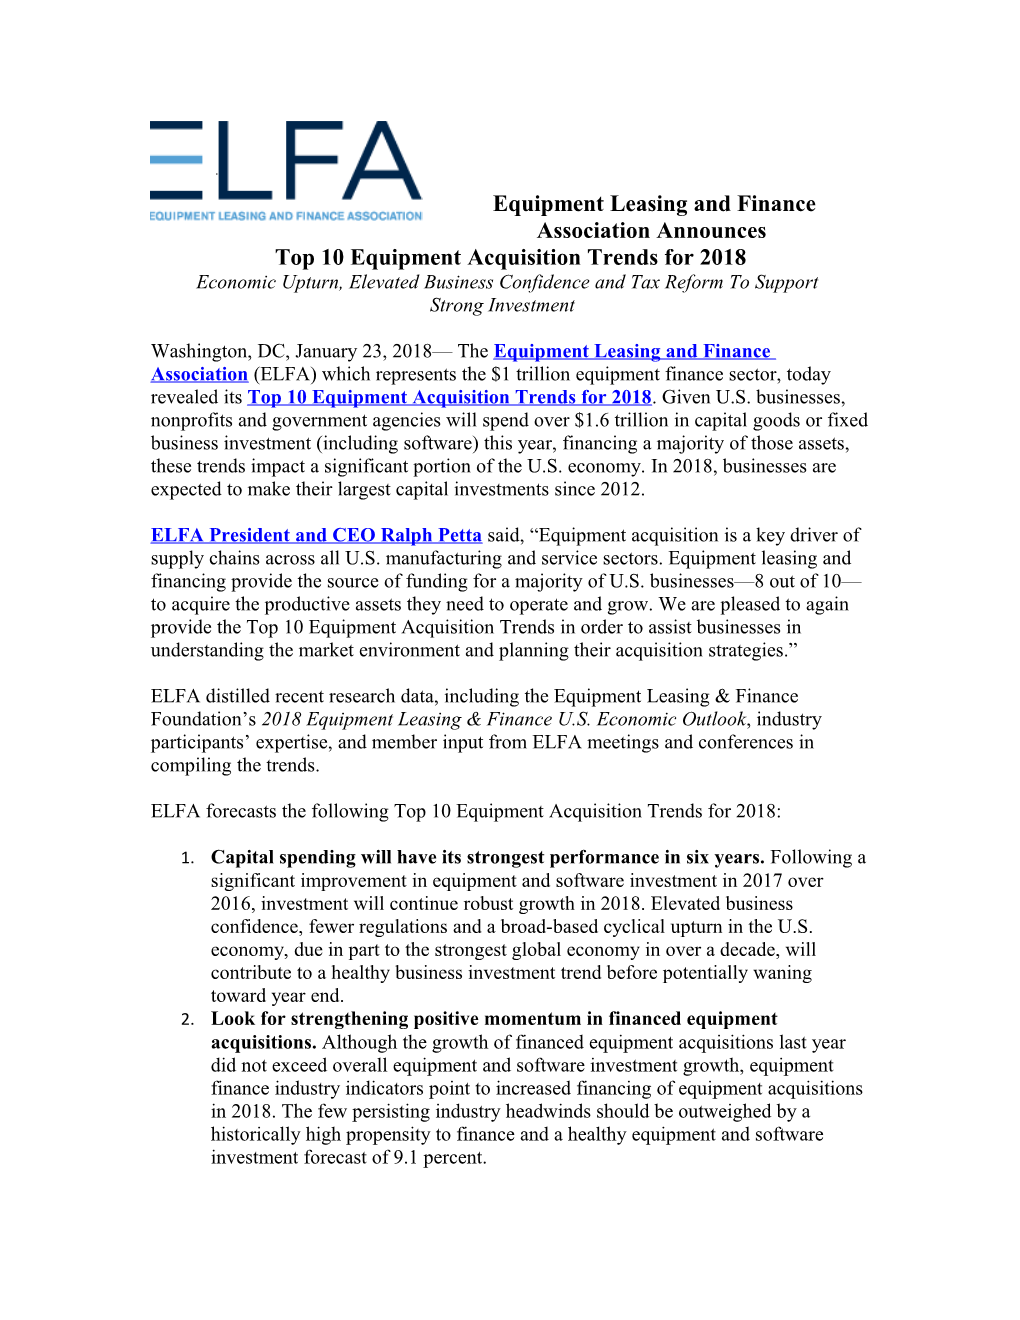 Equipment Leasing and Finance Association Announces